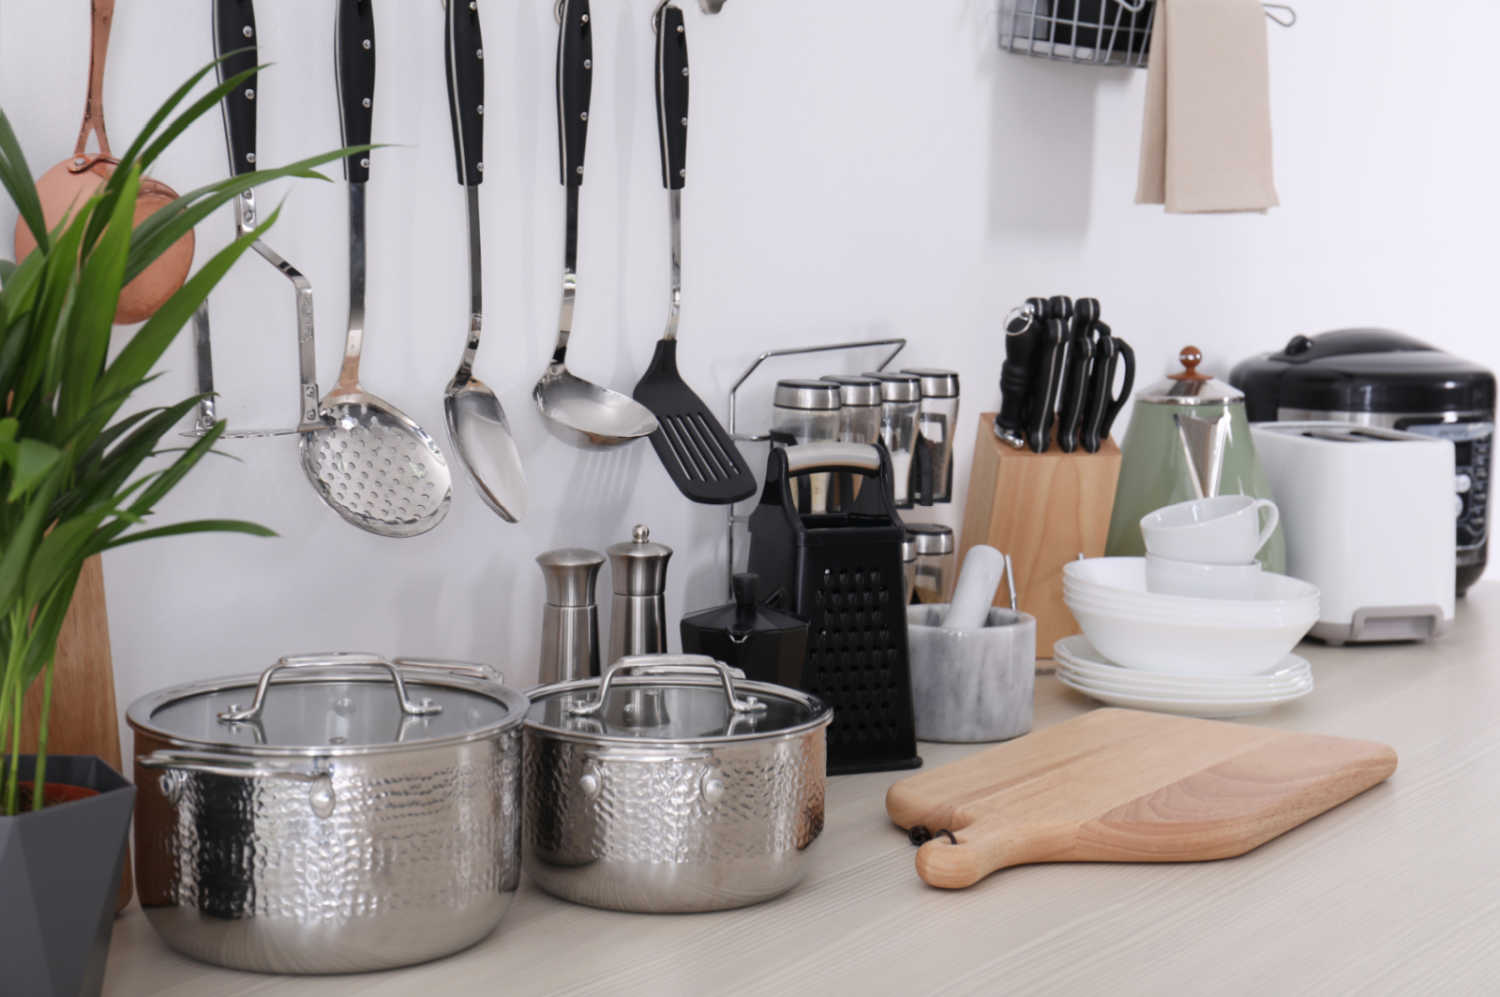 Essential Kitchen Tools Every Chef Needs - My Darling Vegan